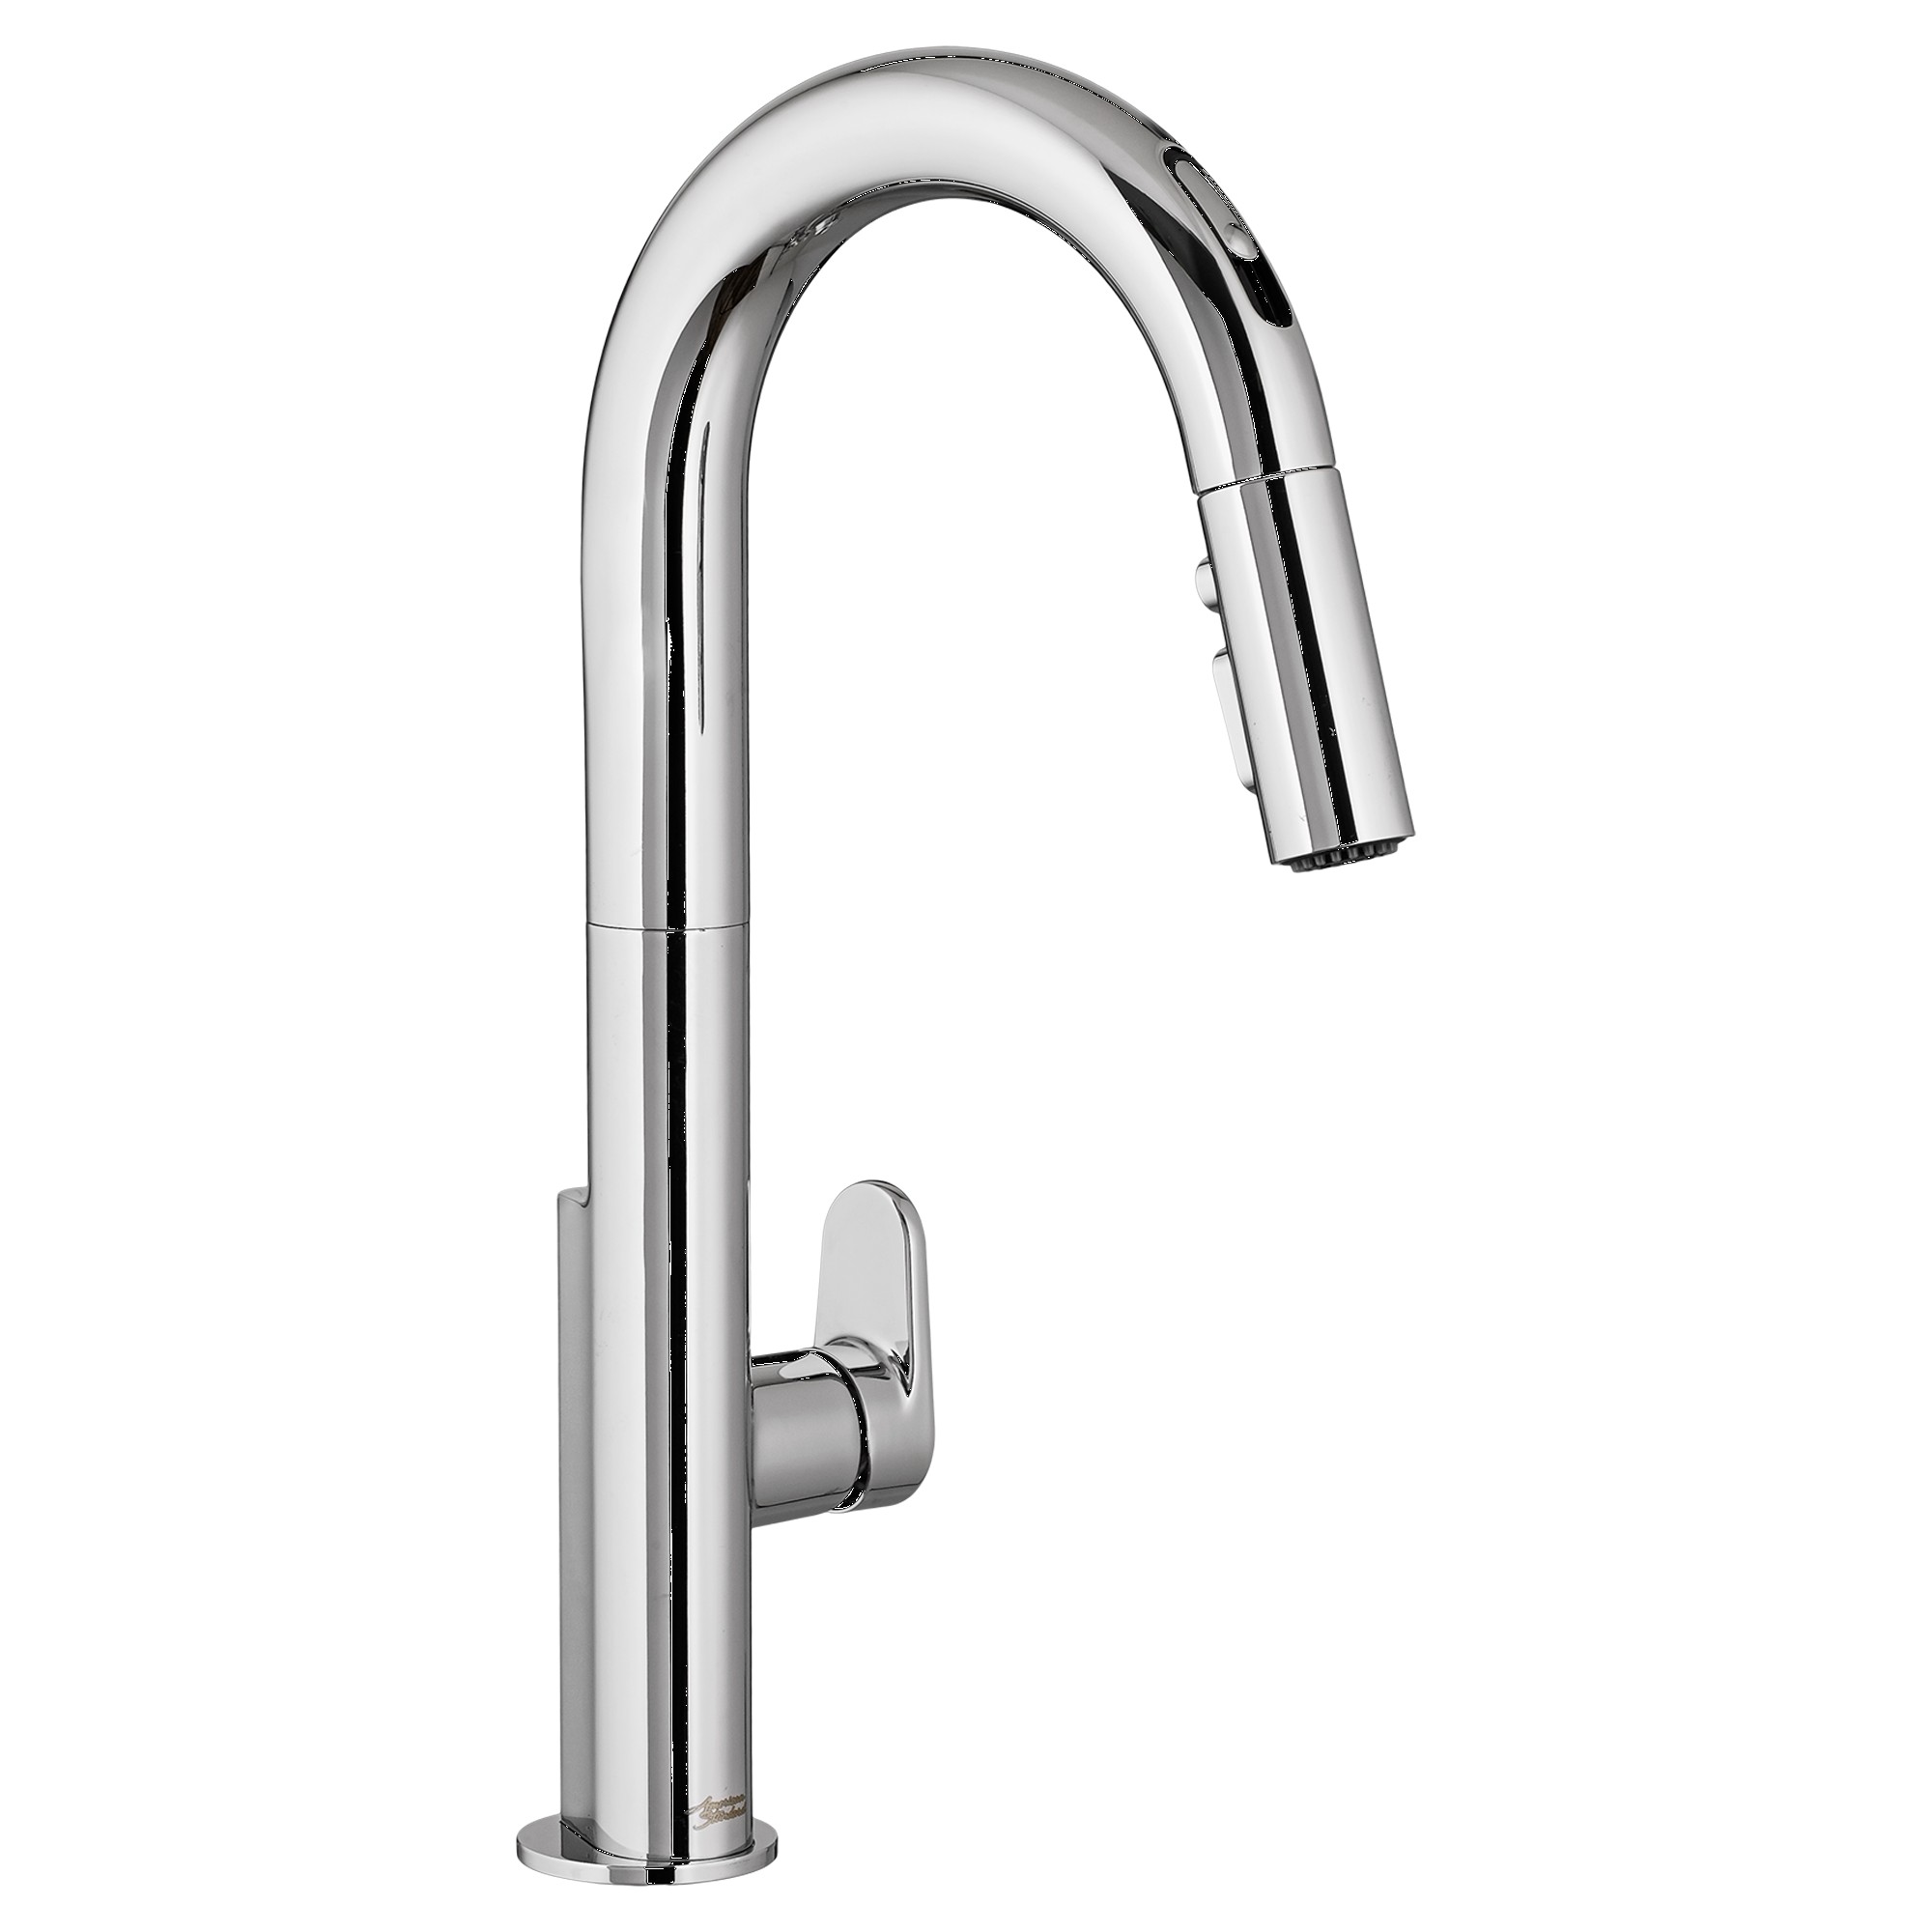 American Standard | 4931.380.002 | AMERICAN STANDARD 4931.380 BEALE PULL-DOWN KITCHEN FAUCET WITH HANDS-FREE TECH CP 002 POLISHED CHROME